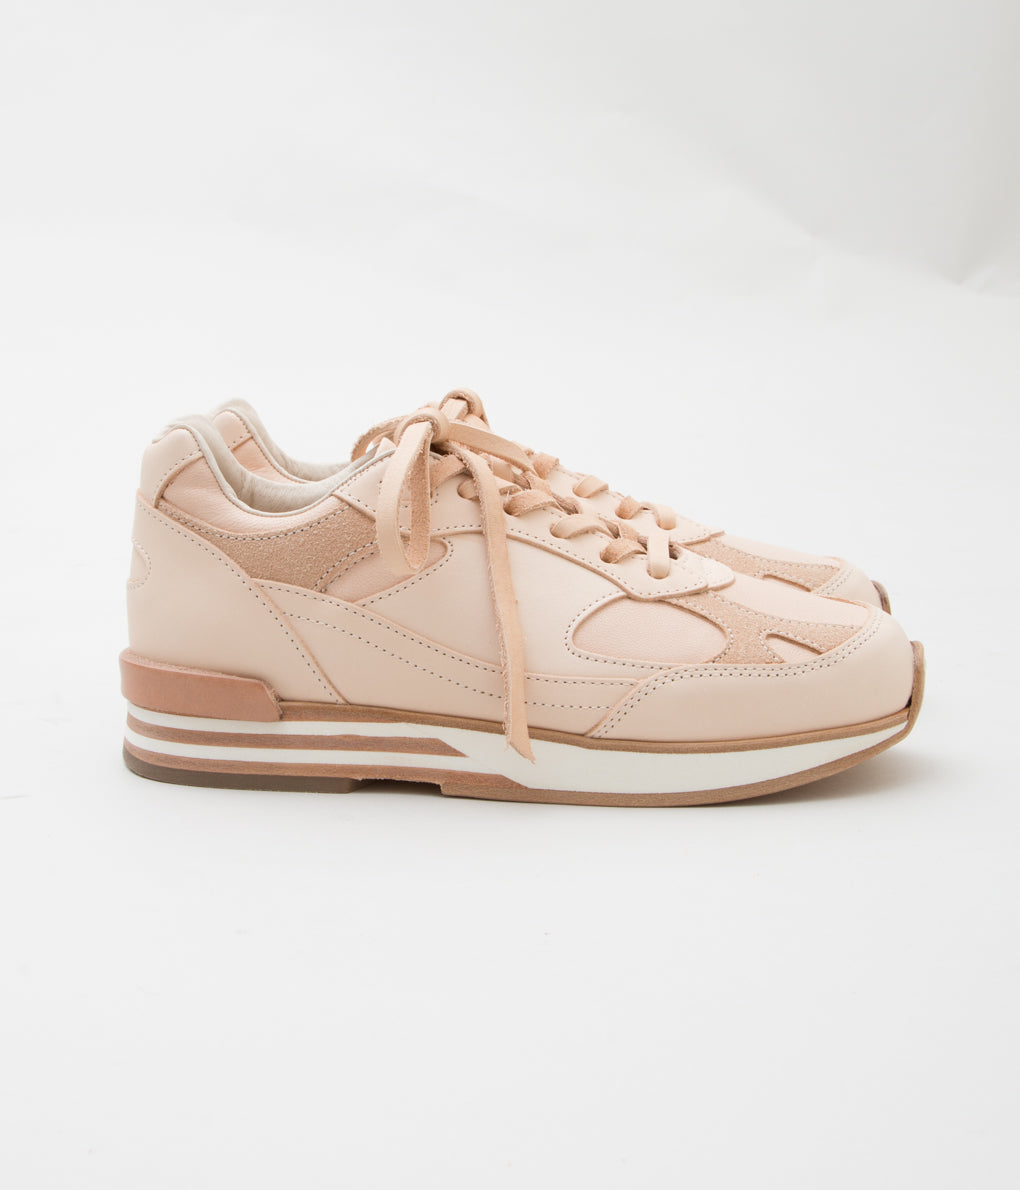 HENDER SCHEME "manual industrial products 28" (NATURAL)